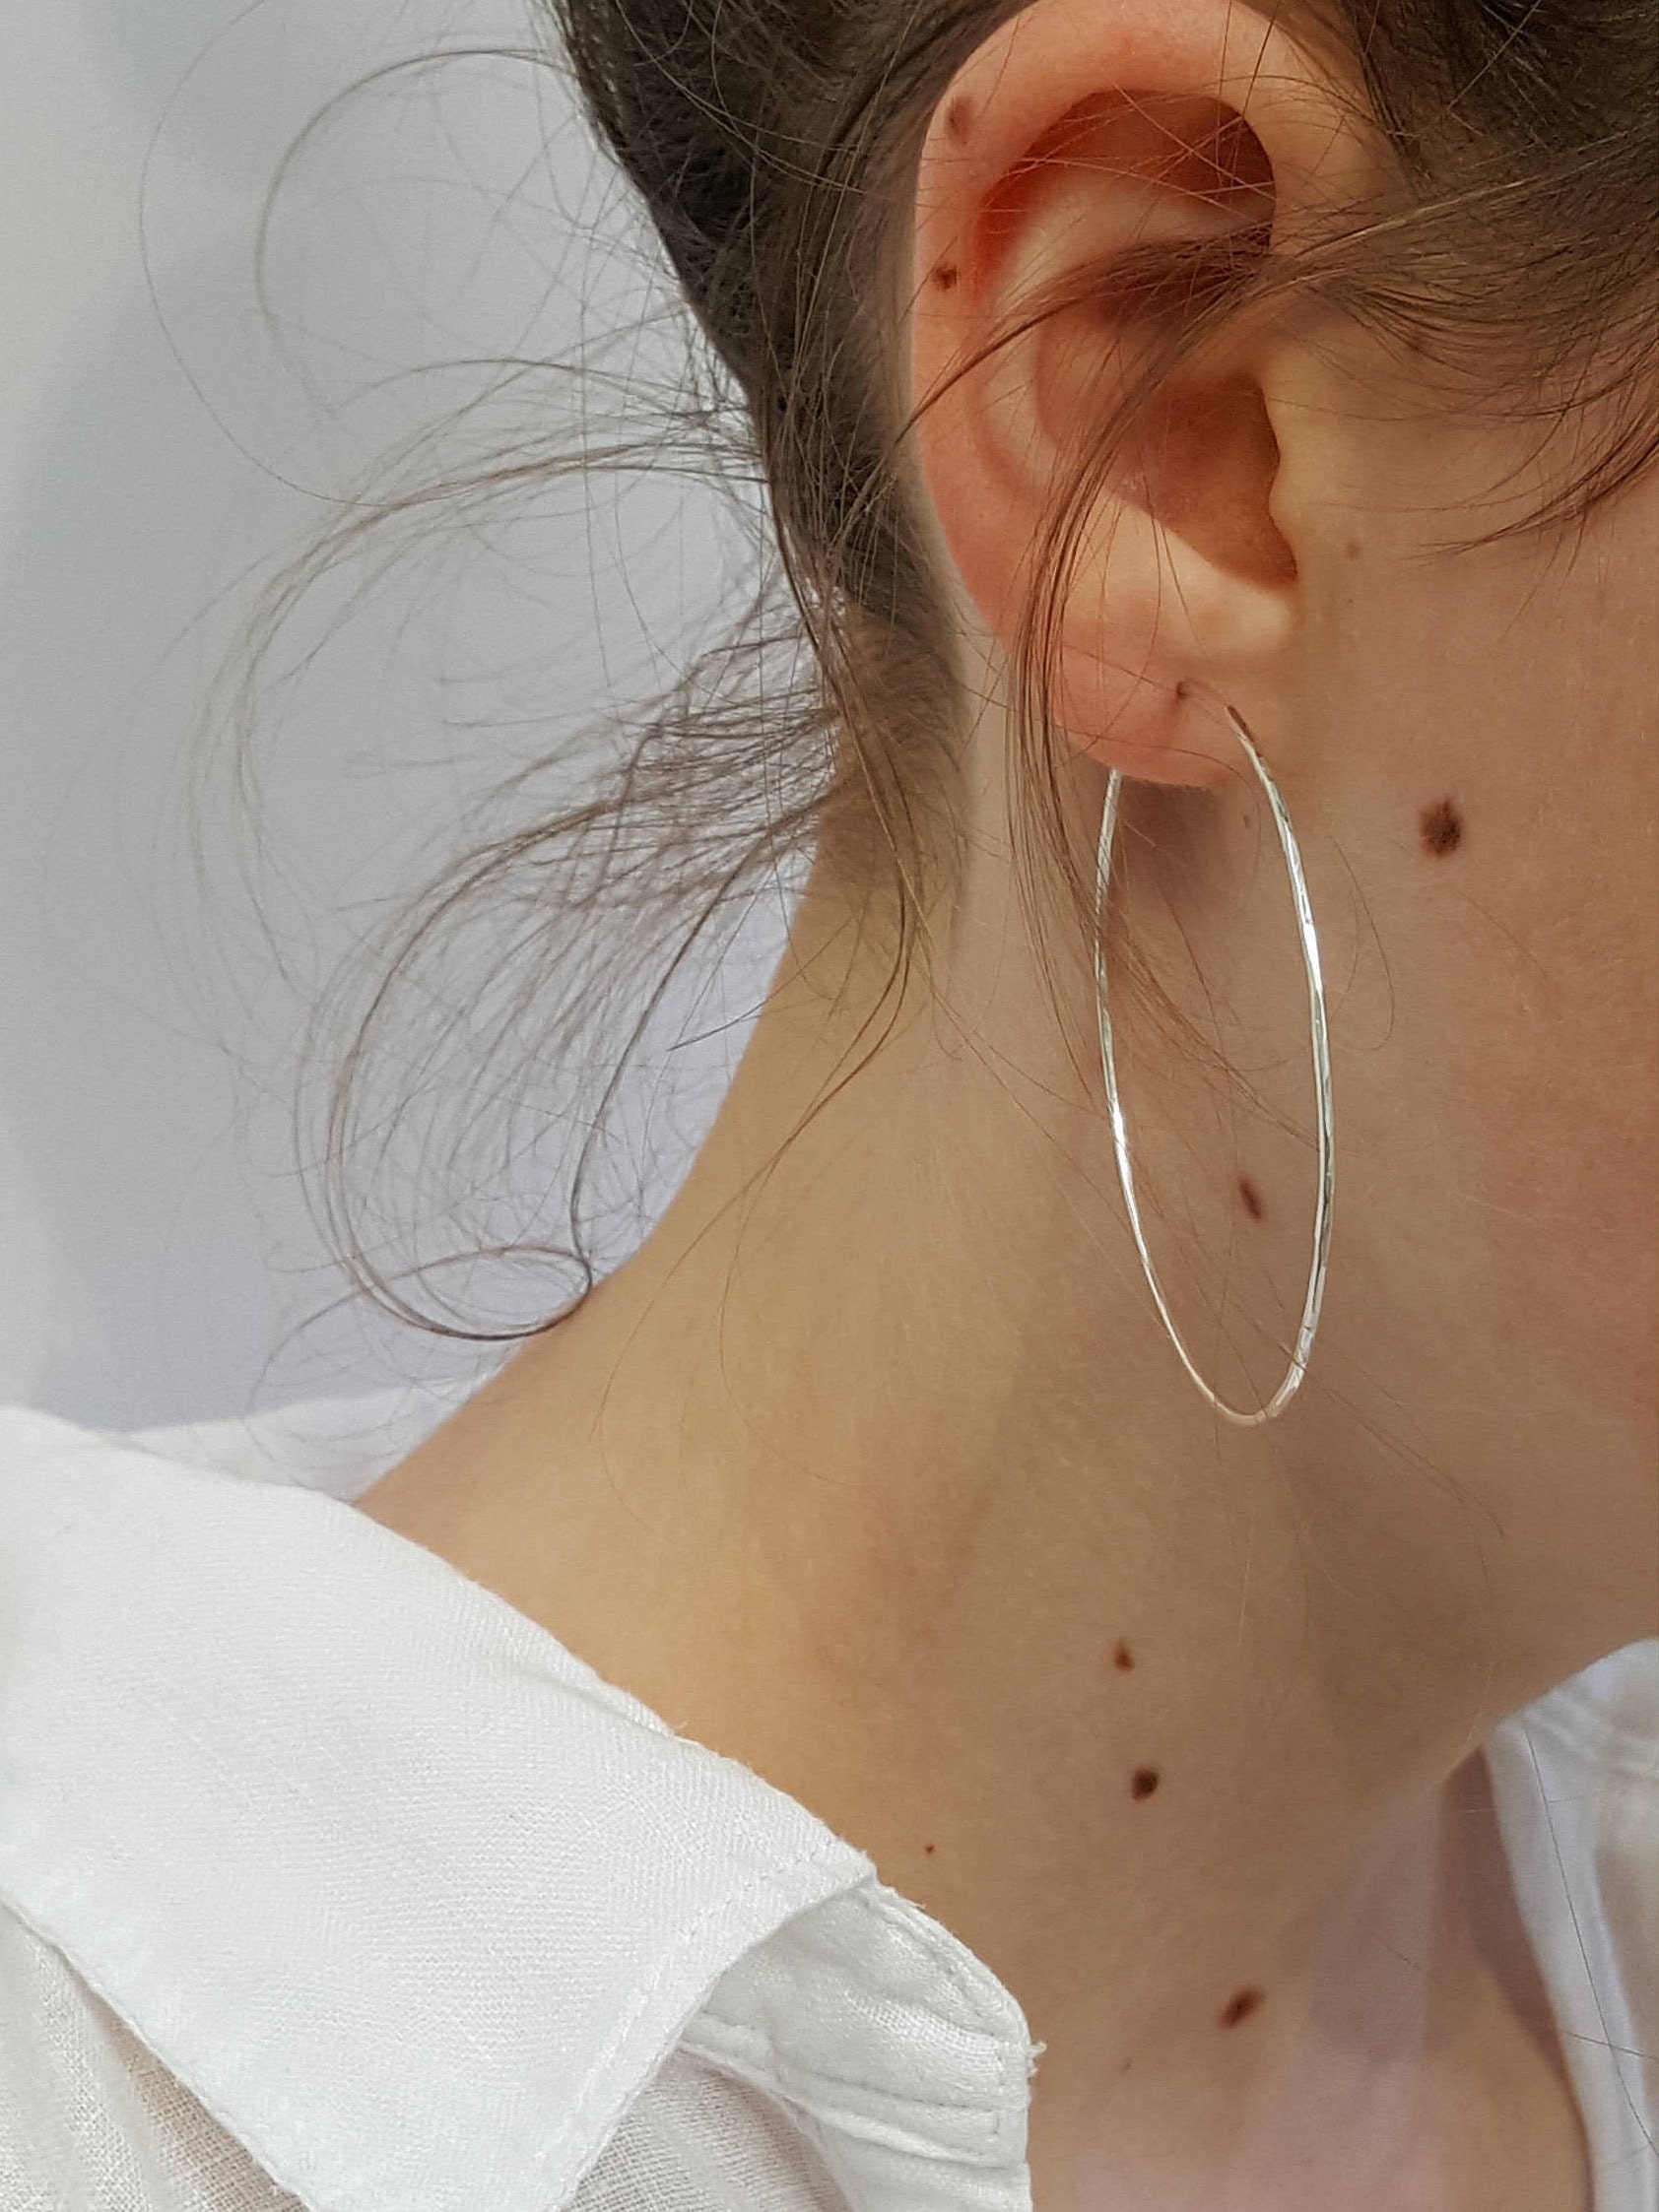 Small to Large Thin Solid 925 Sterling Silver Hoop Earrings 1 4 Inch Thin  Wire Hoop Earrings Sterling Silver Minimalist Earrings 